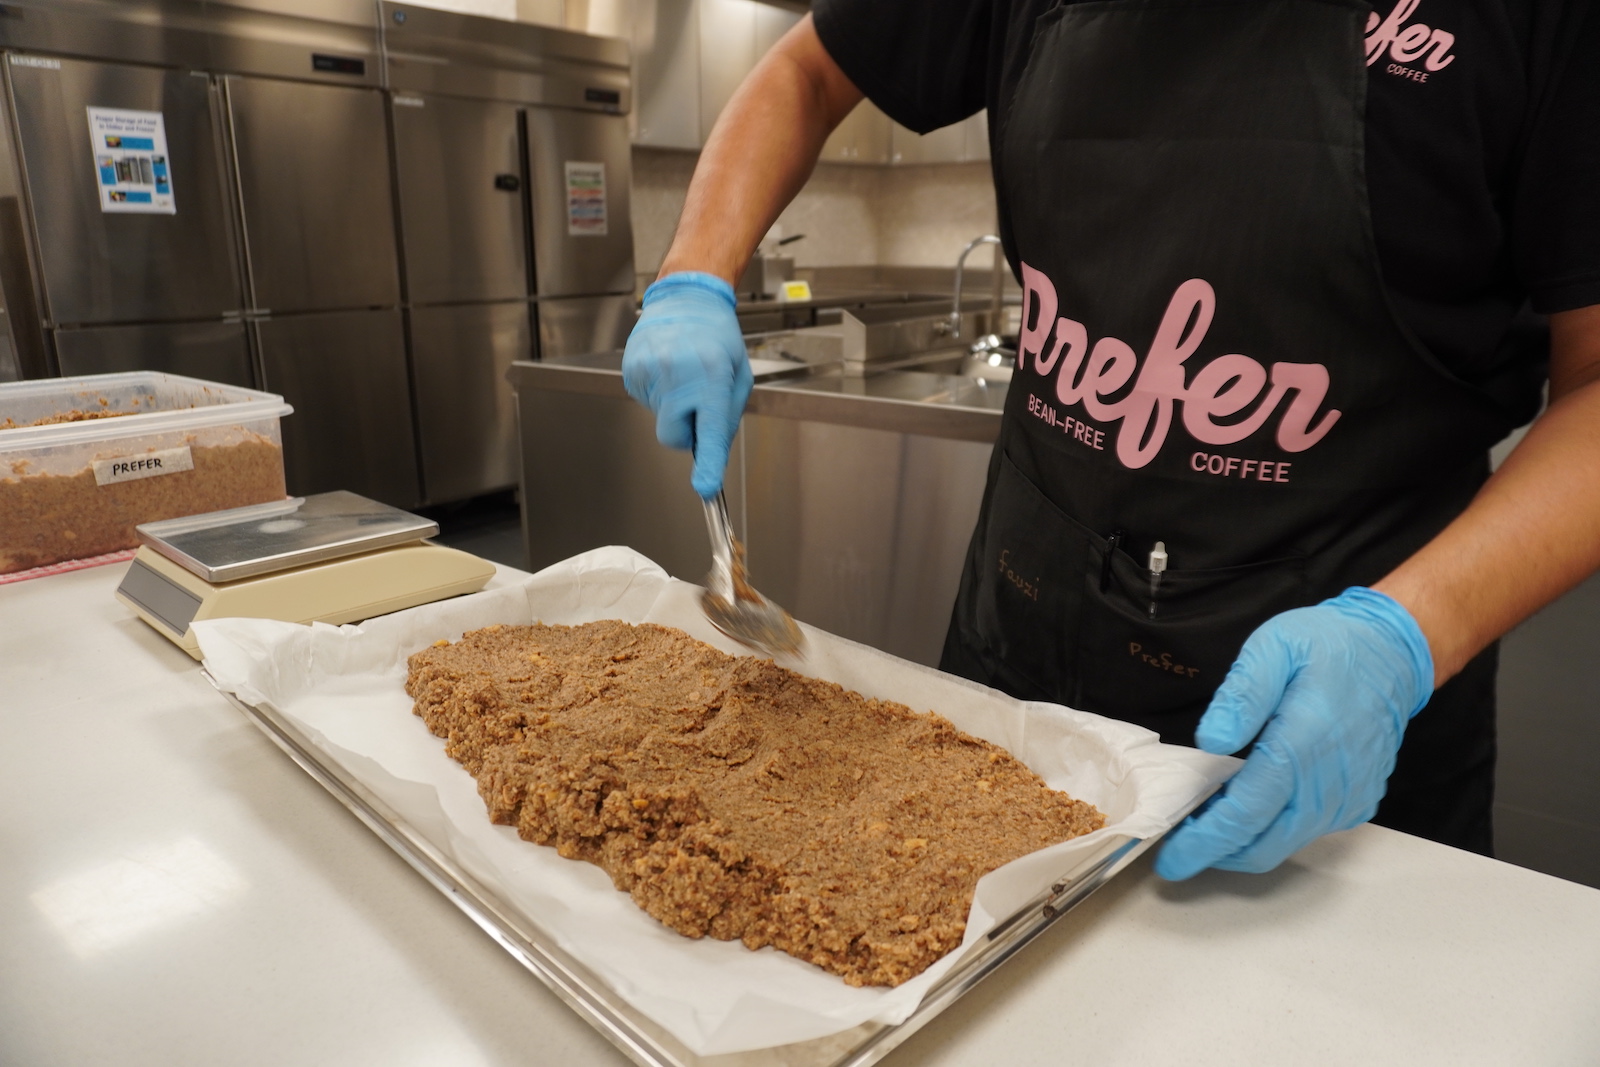 A person in a black apron with the word "Prefer" on it smooths out brown grounds in a baking hseet